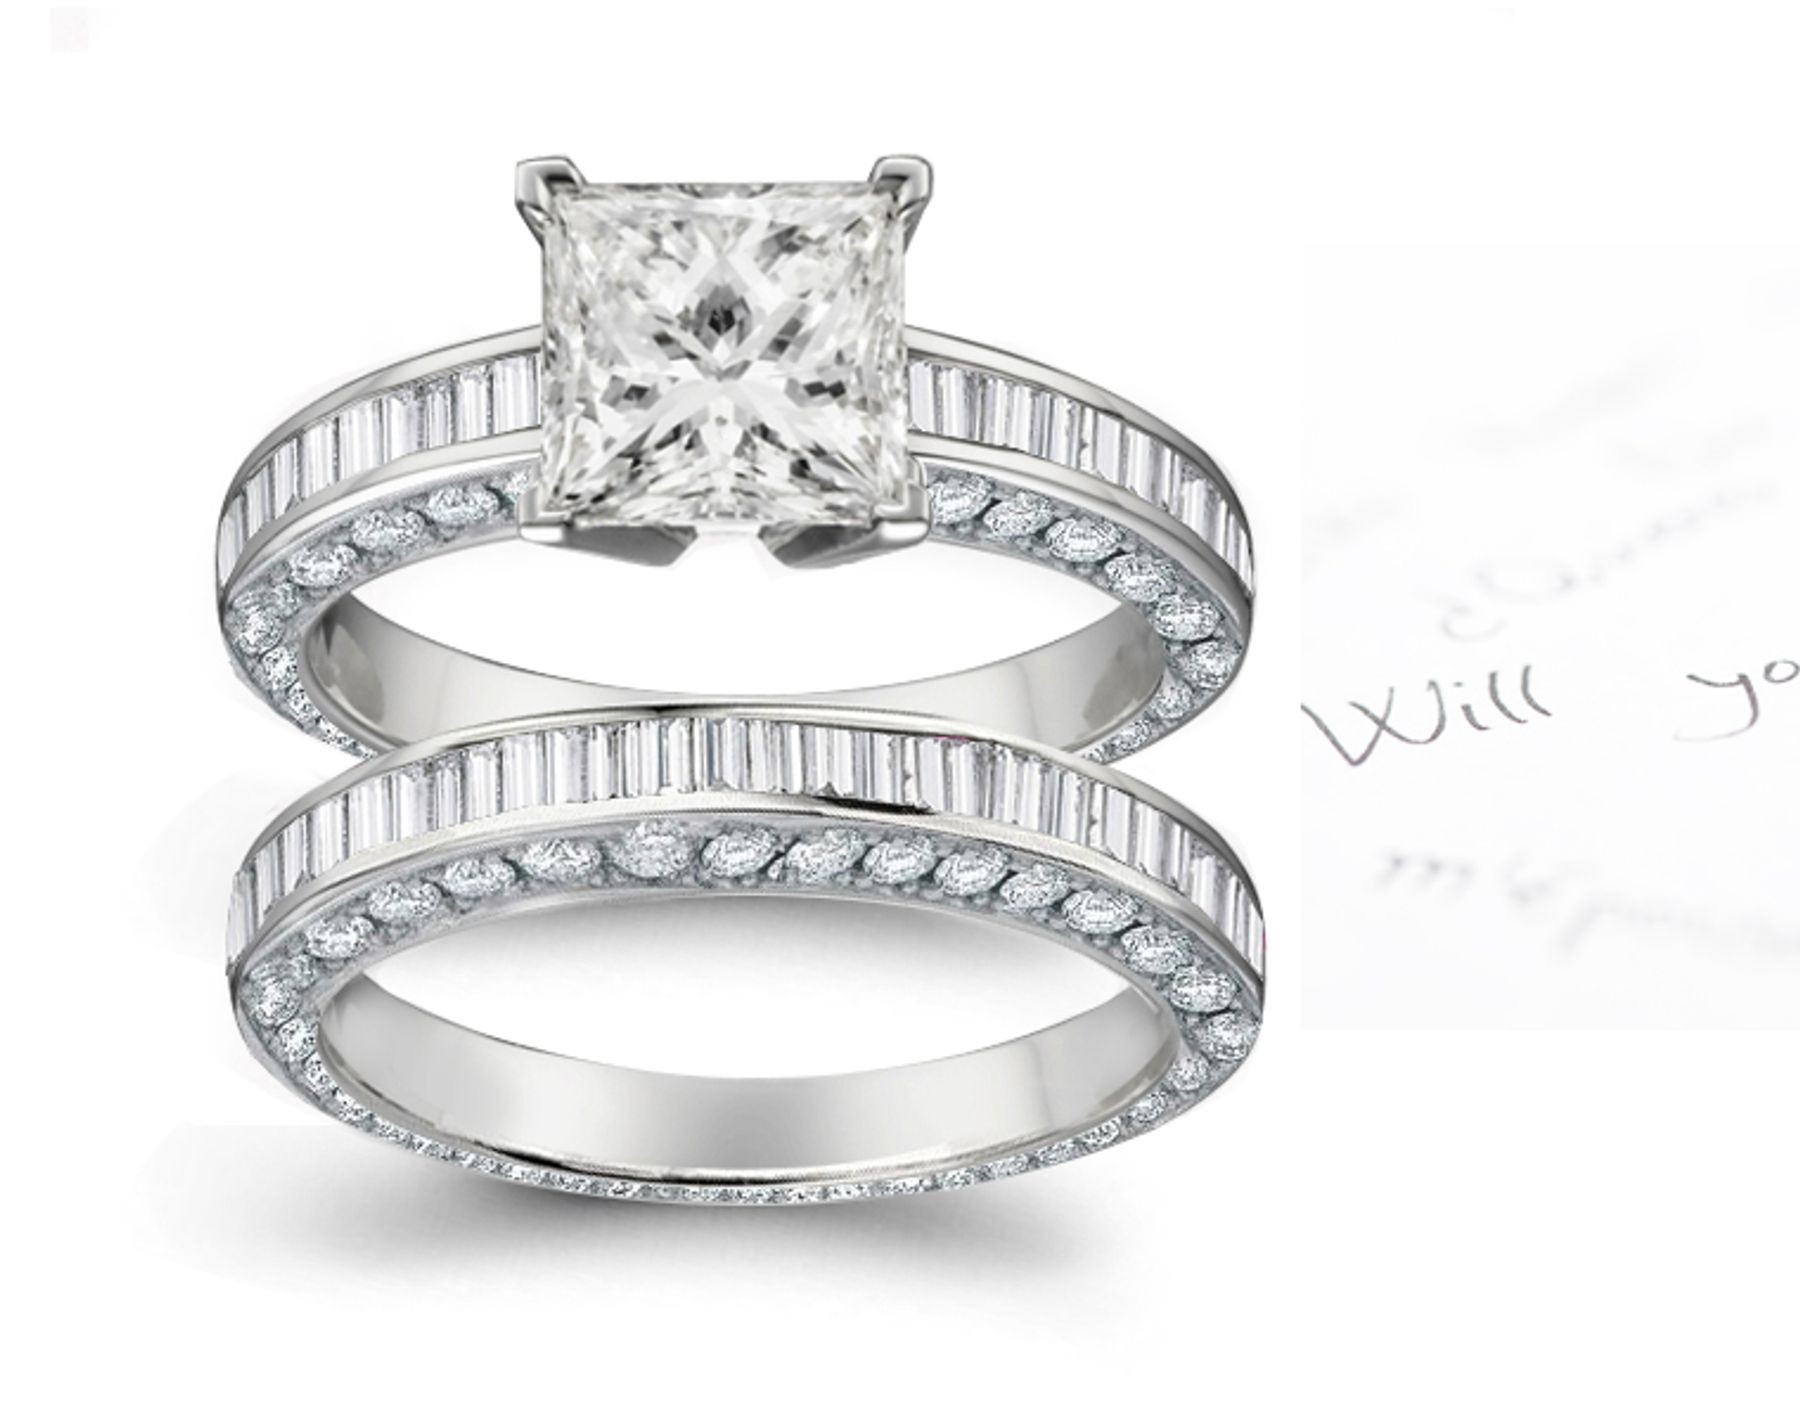 Diamond Engagement and Wedding Halo Diamond Ring and Band in Platinum and Gold